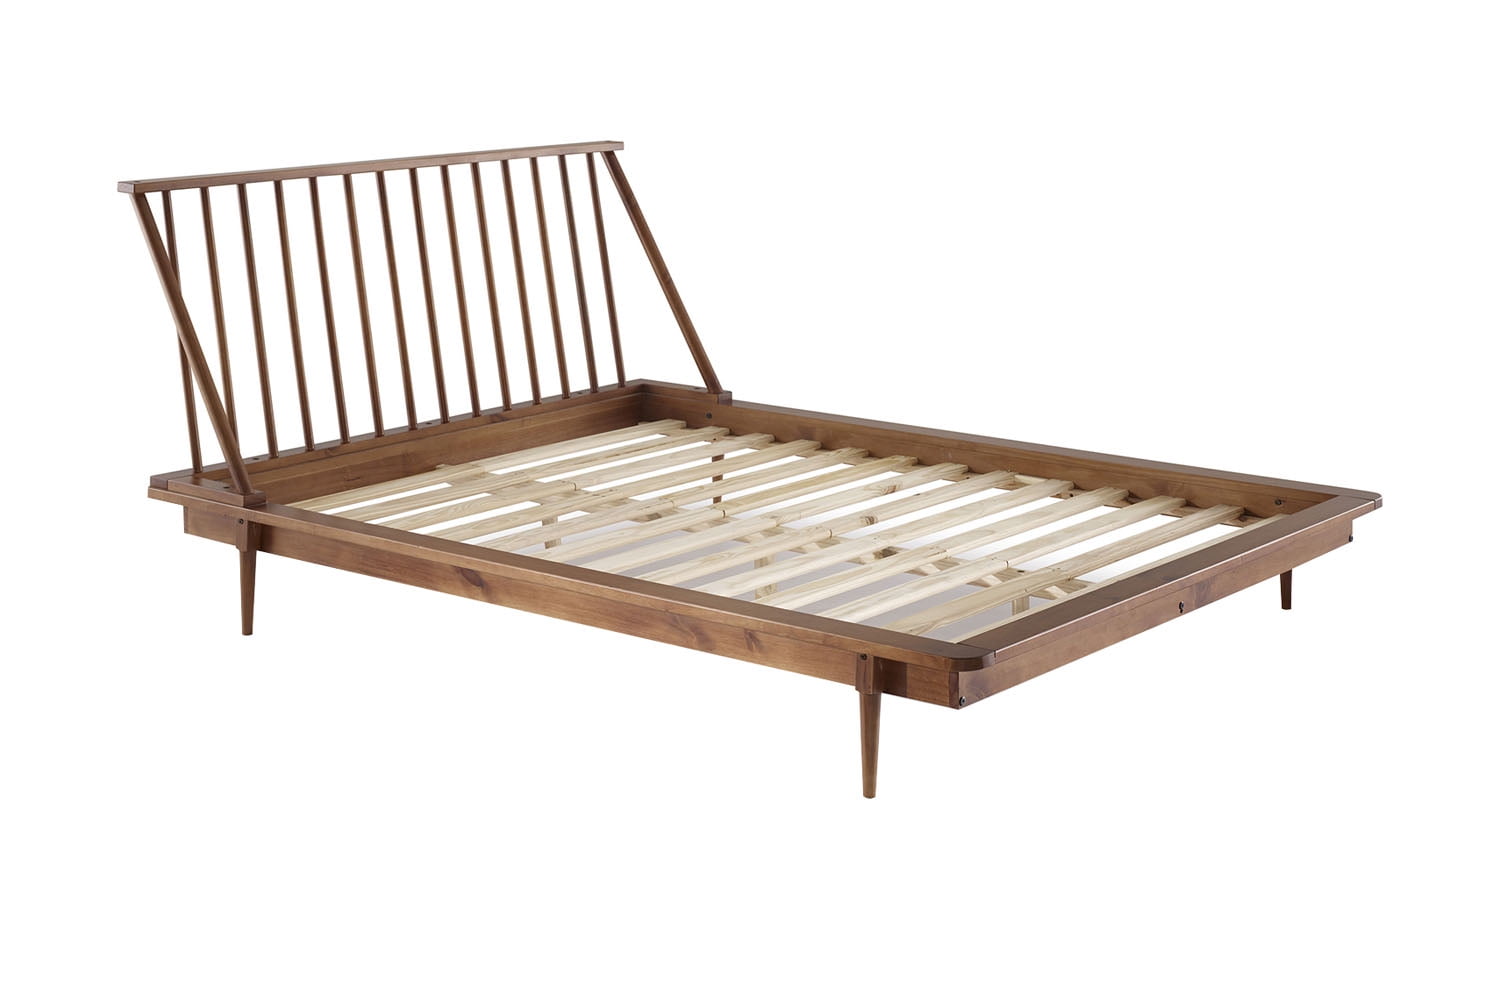 Modern Wood Queen Spindle Bed Caramel, Wood Spindle Bed King